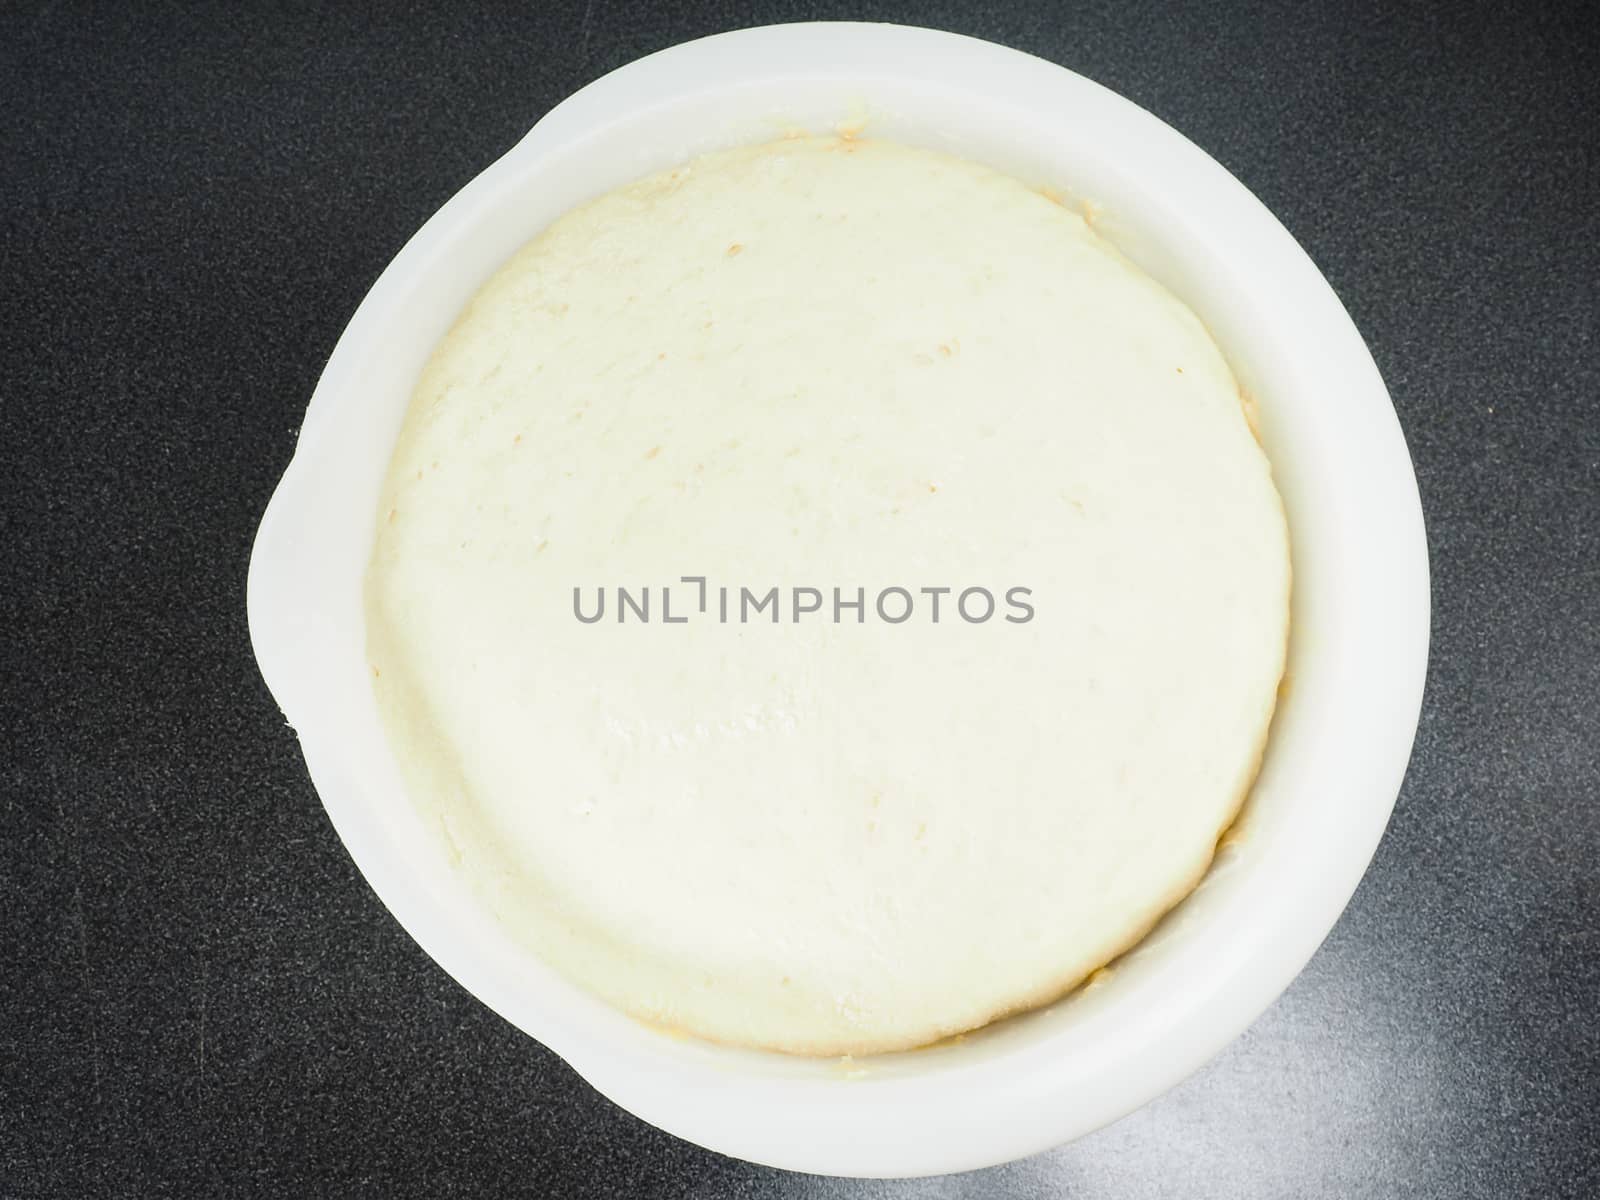 Proven dough in a white plastic bowl on black table by Arvebettum